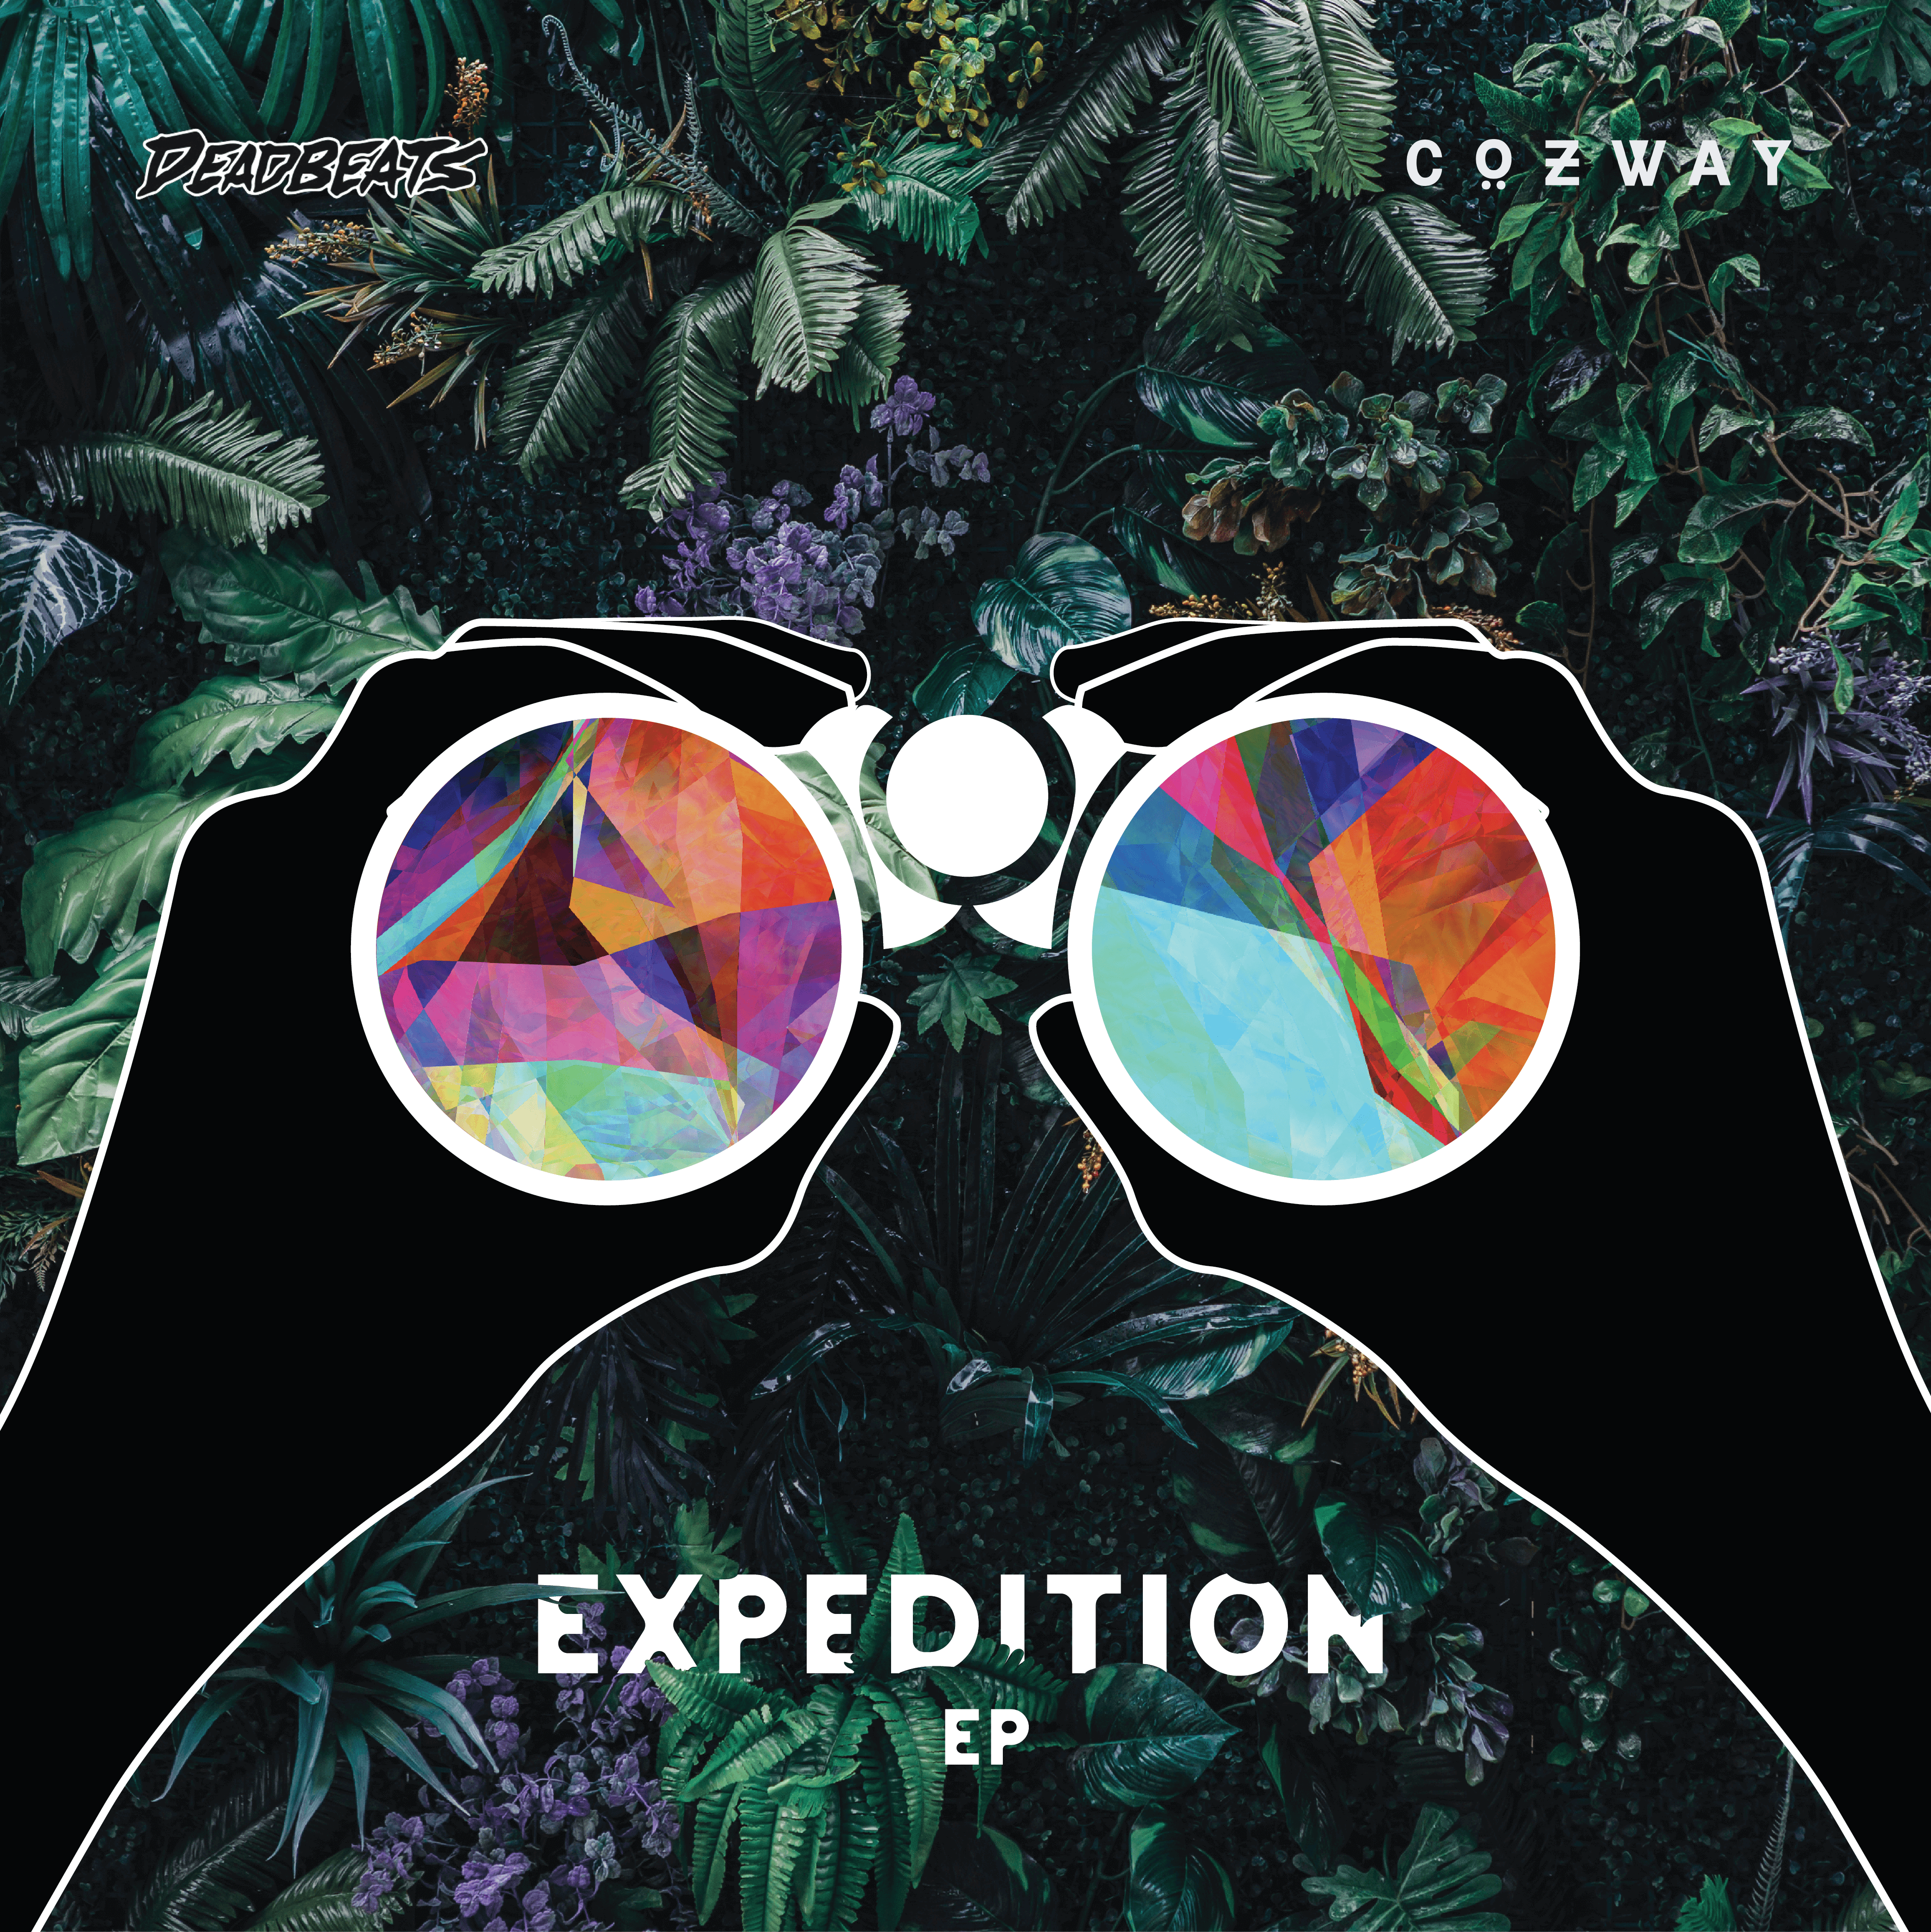 Cozway Guides Us on an ‘Expedition’ through Sound